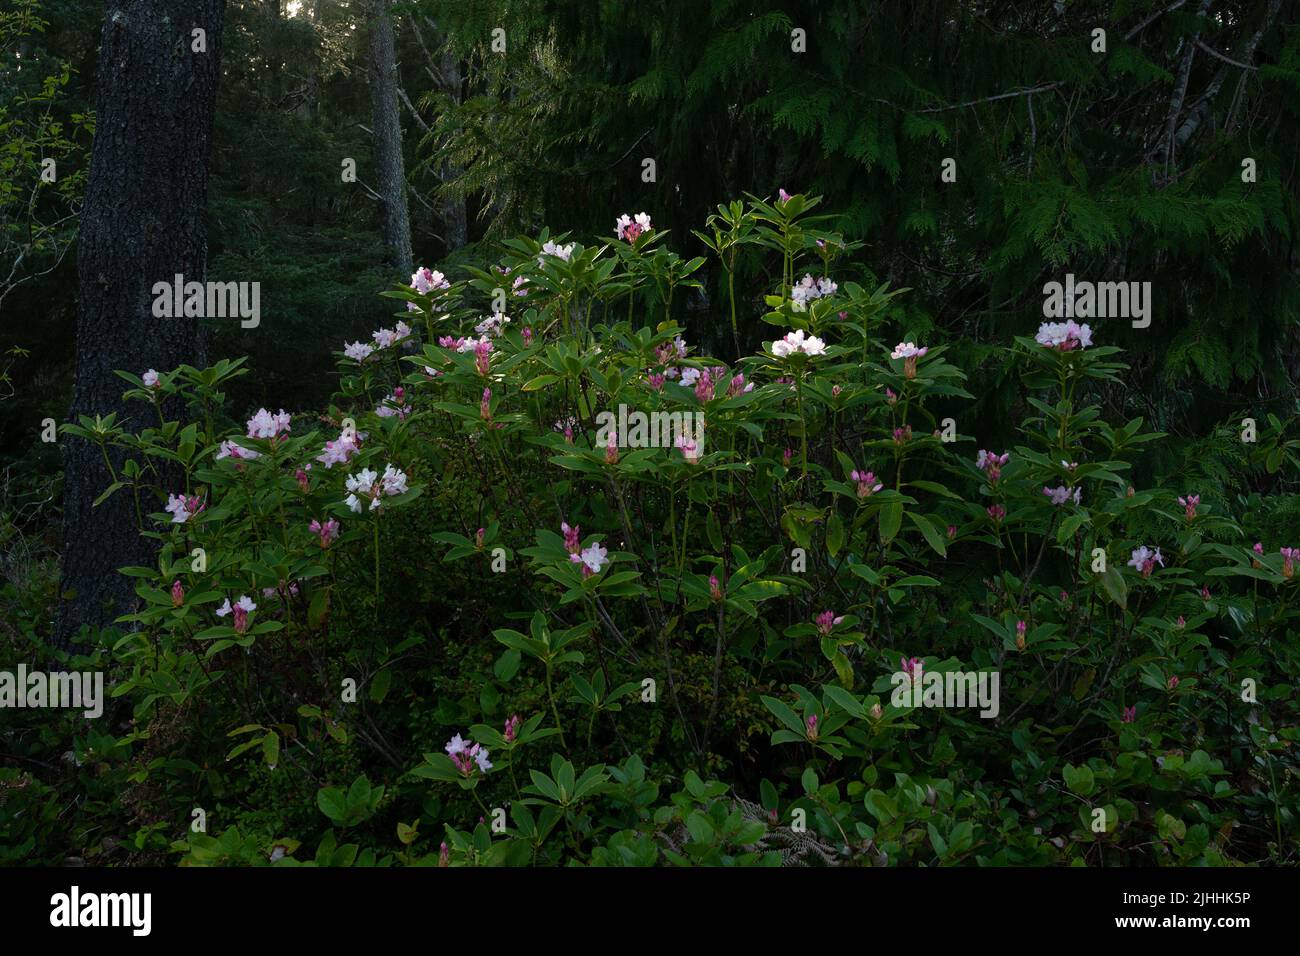 Misty scene in Redwood National Park in the springtime with rhododendron flowers.  Stock Photo